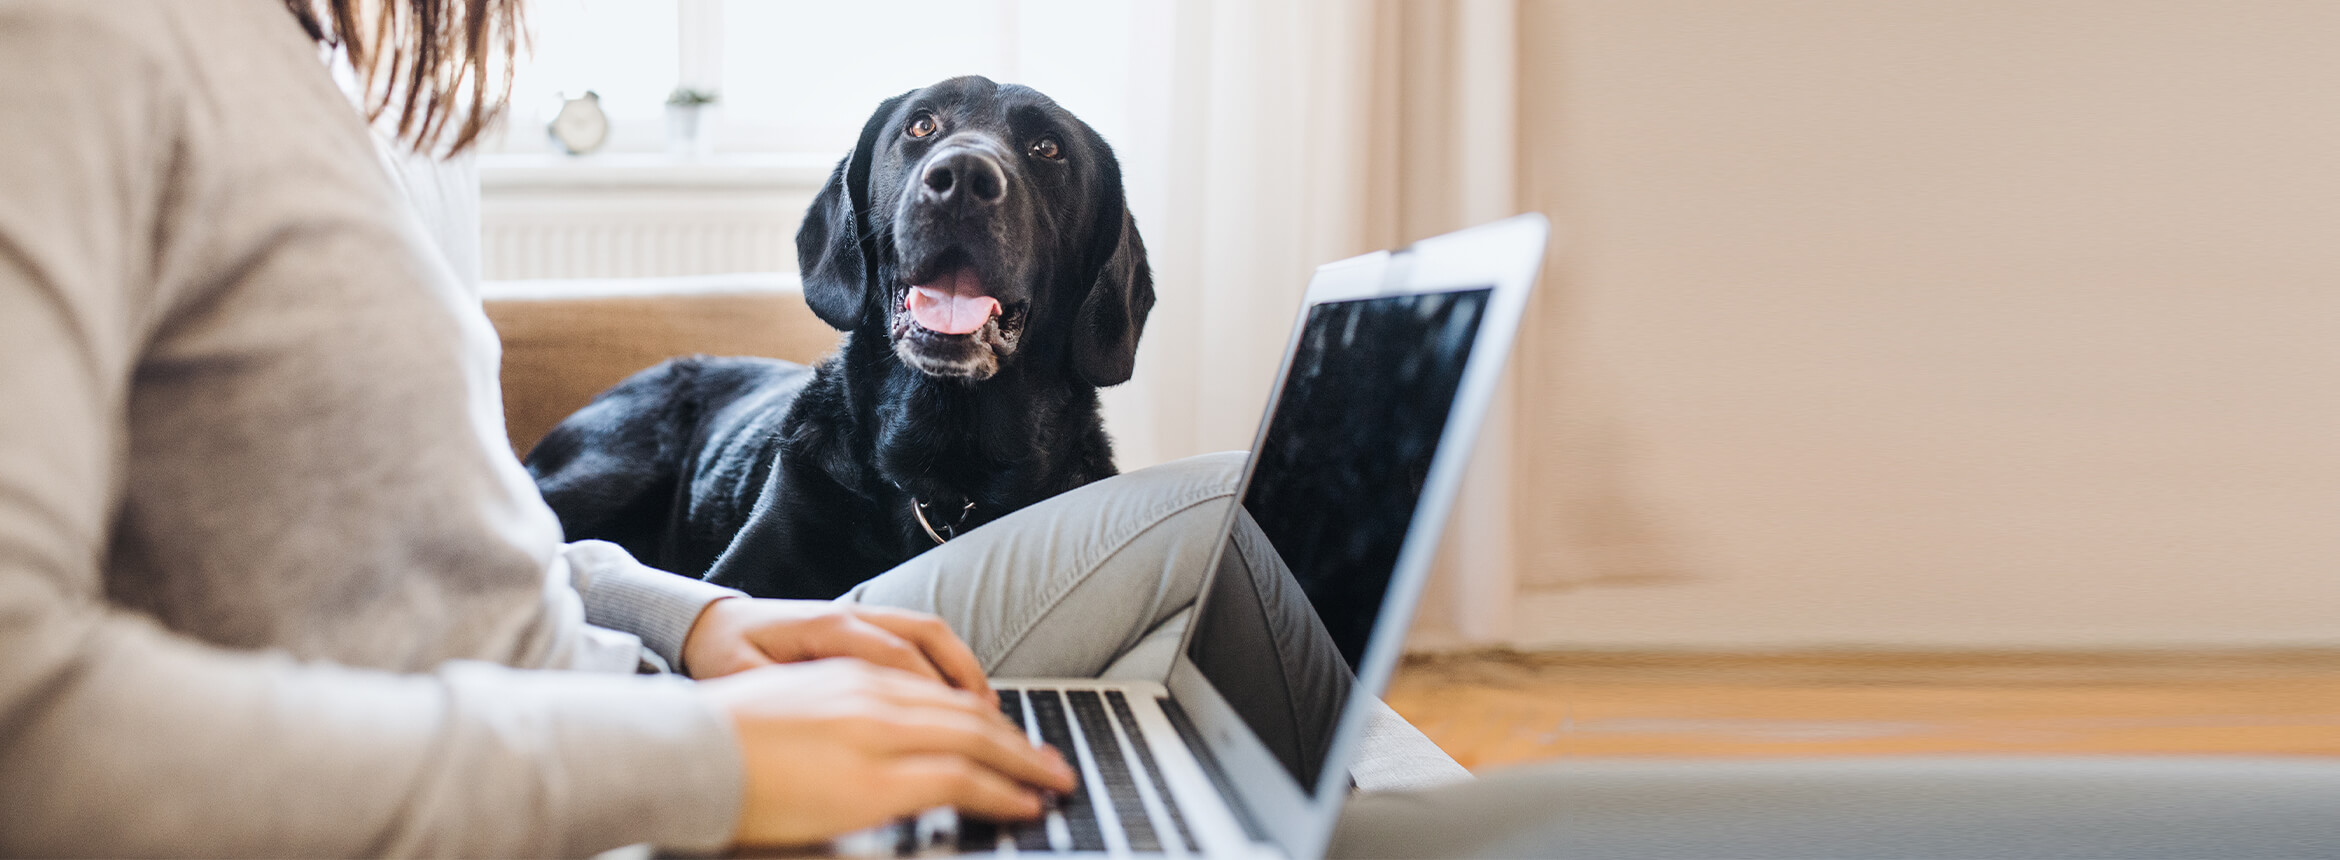 dog laying on couch next to a woman using a laptop